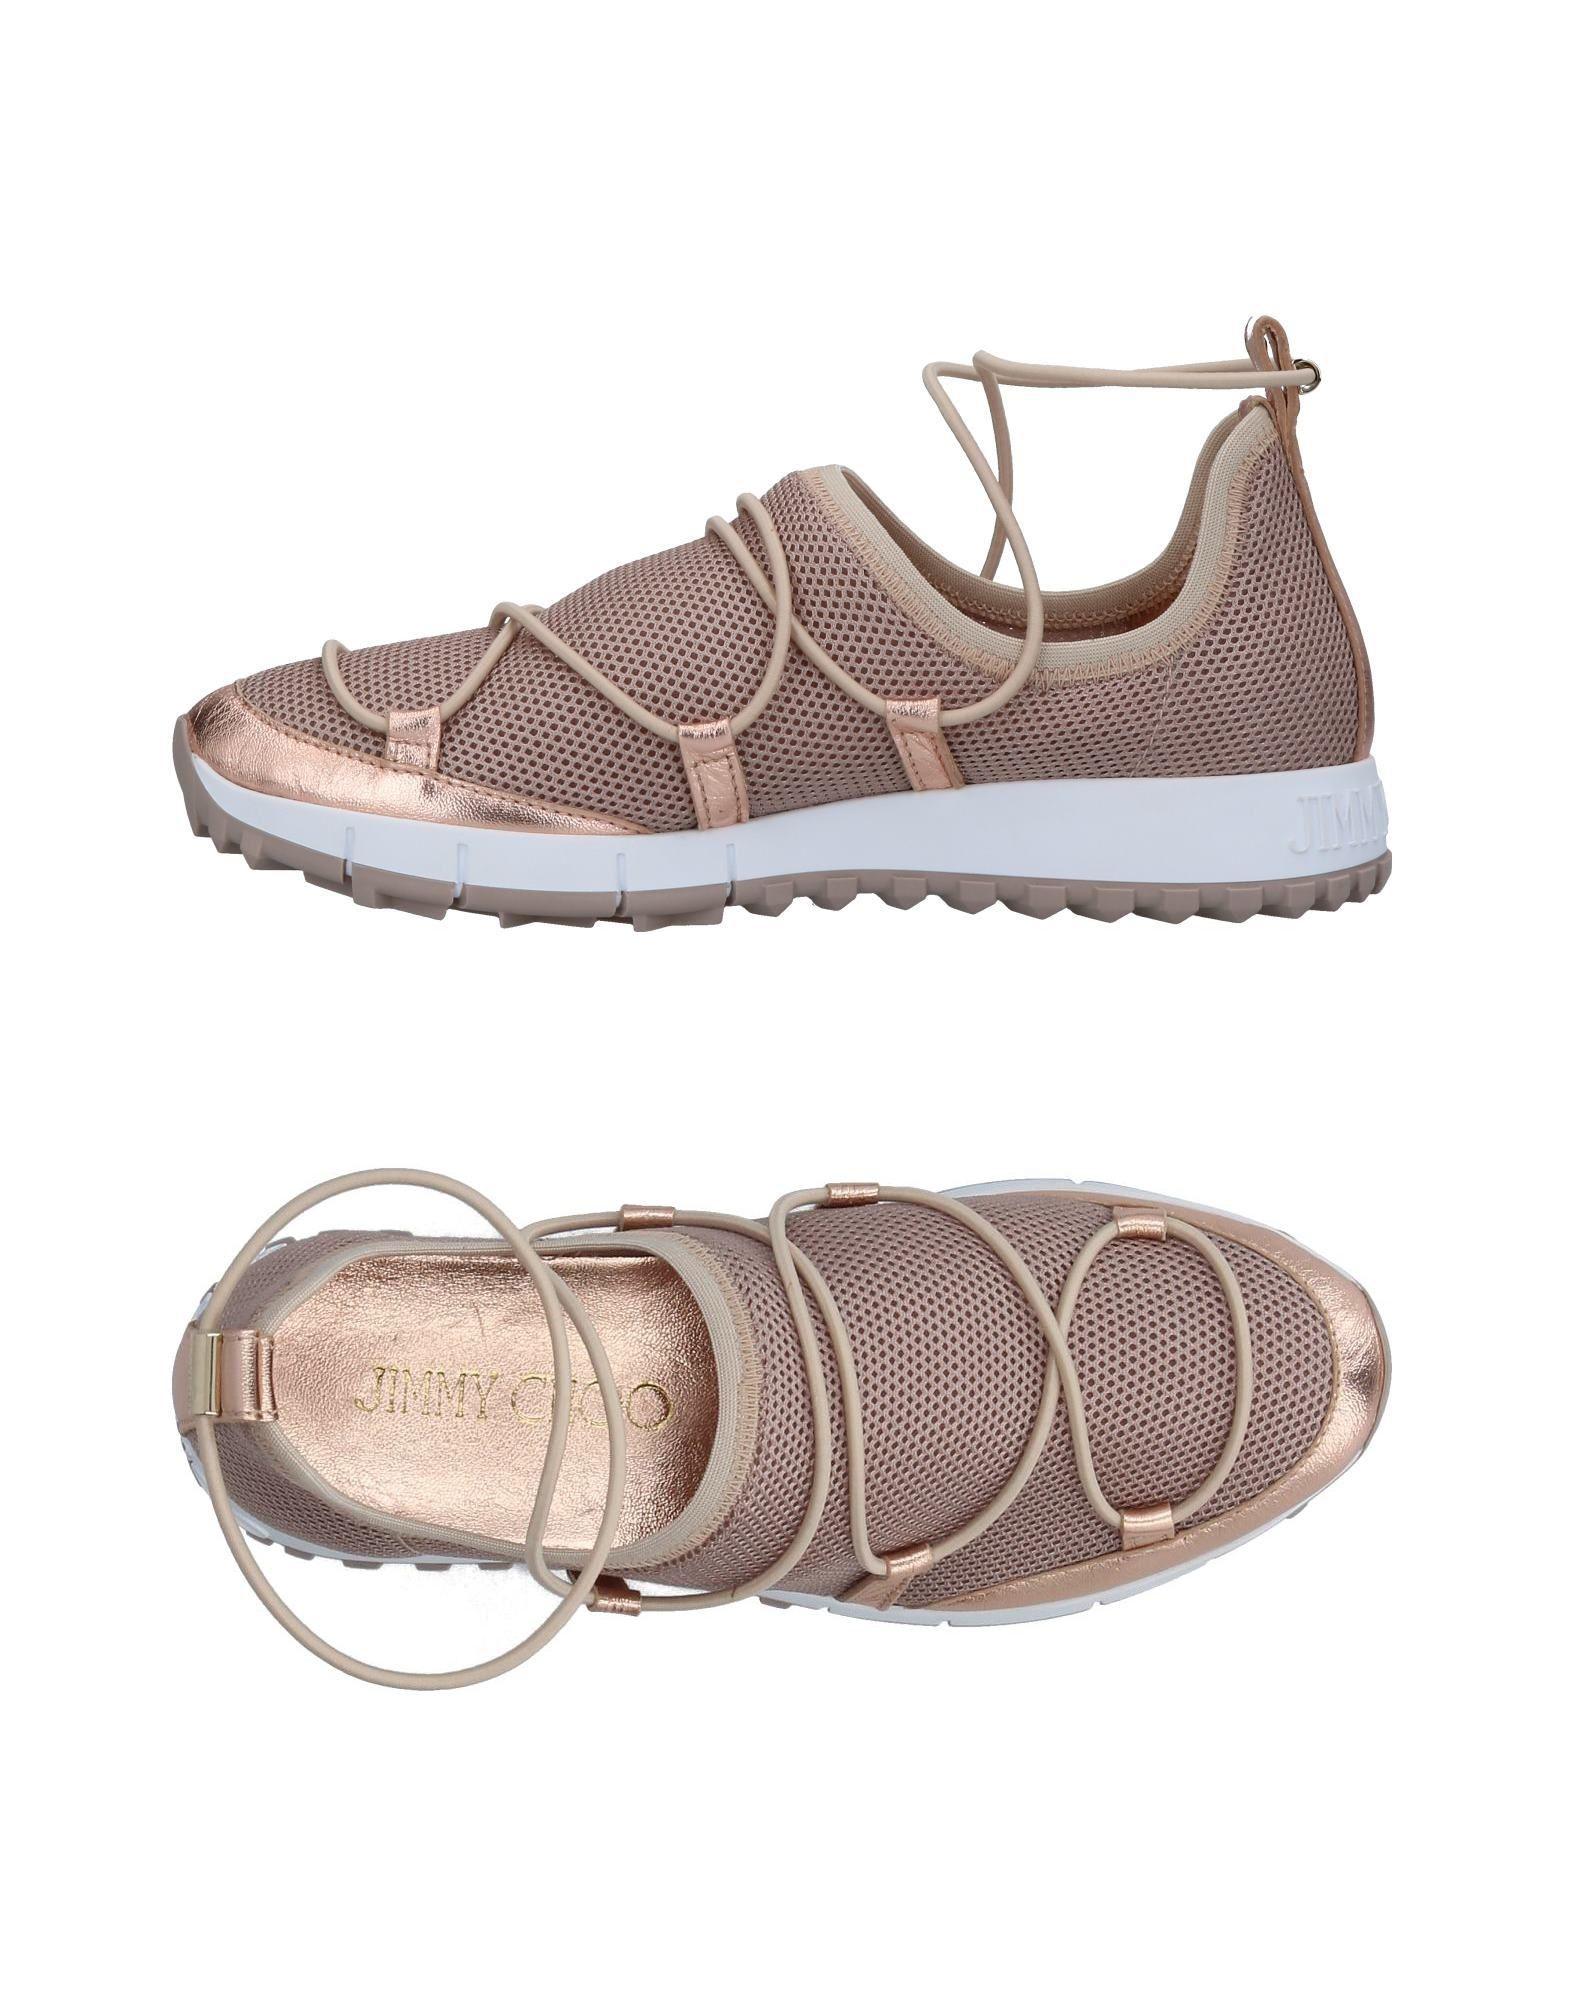 Jimmy Choo Leather Low-tops & Sneakers in Pastel Pink (Pink) - Lyst